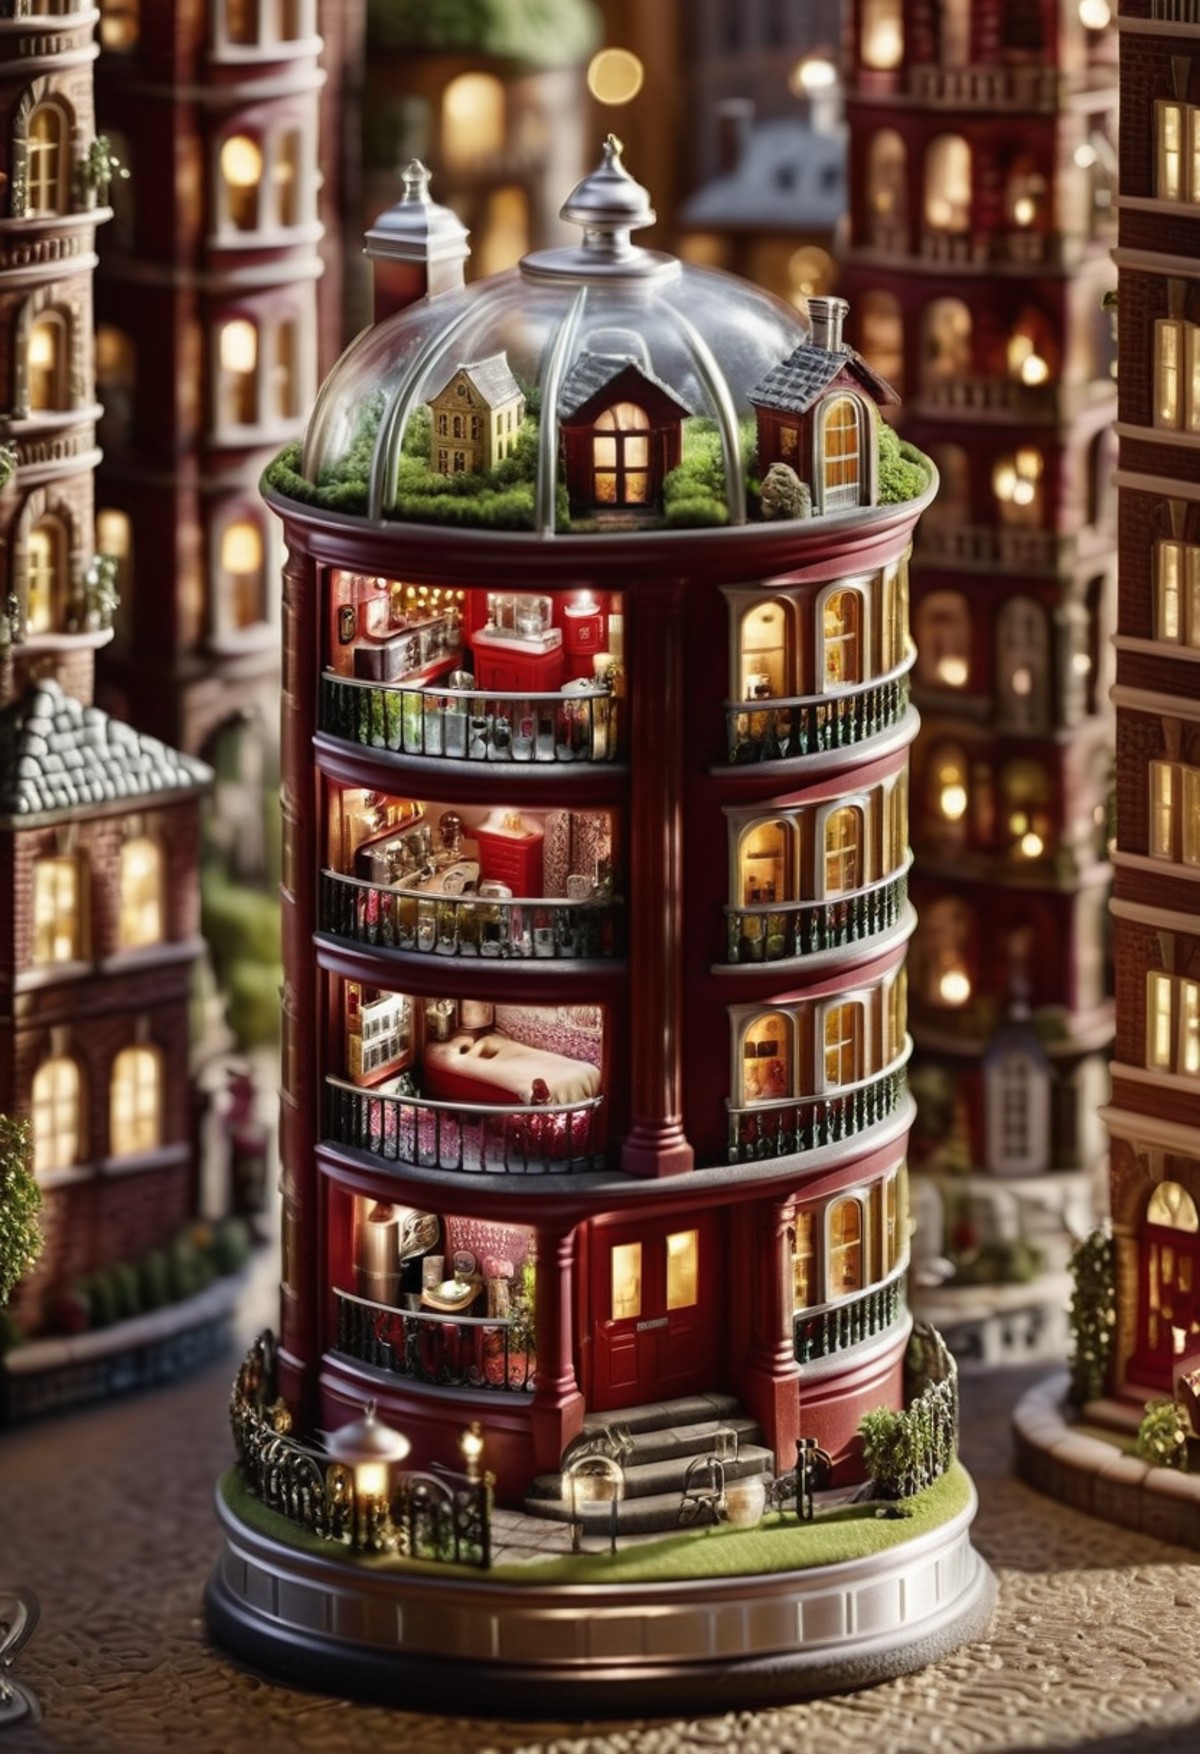 cinematic photo in a surreal landscape, a miniature of a house sits nestled in the heart of a bustling city. Inside a can ...